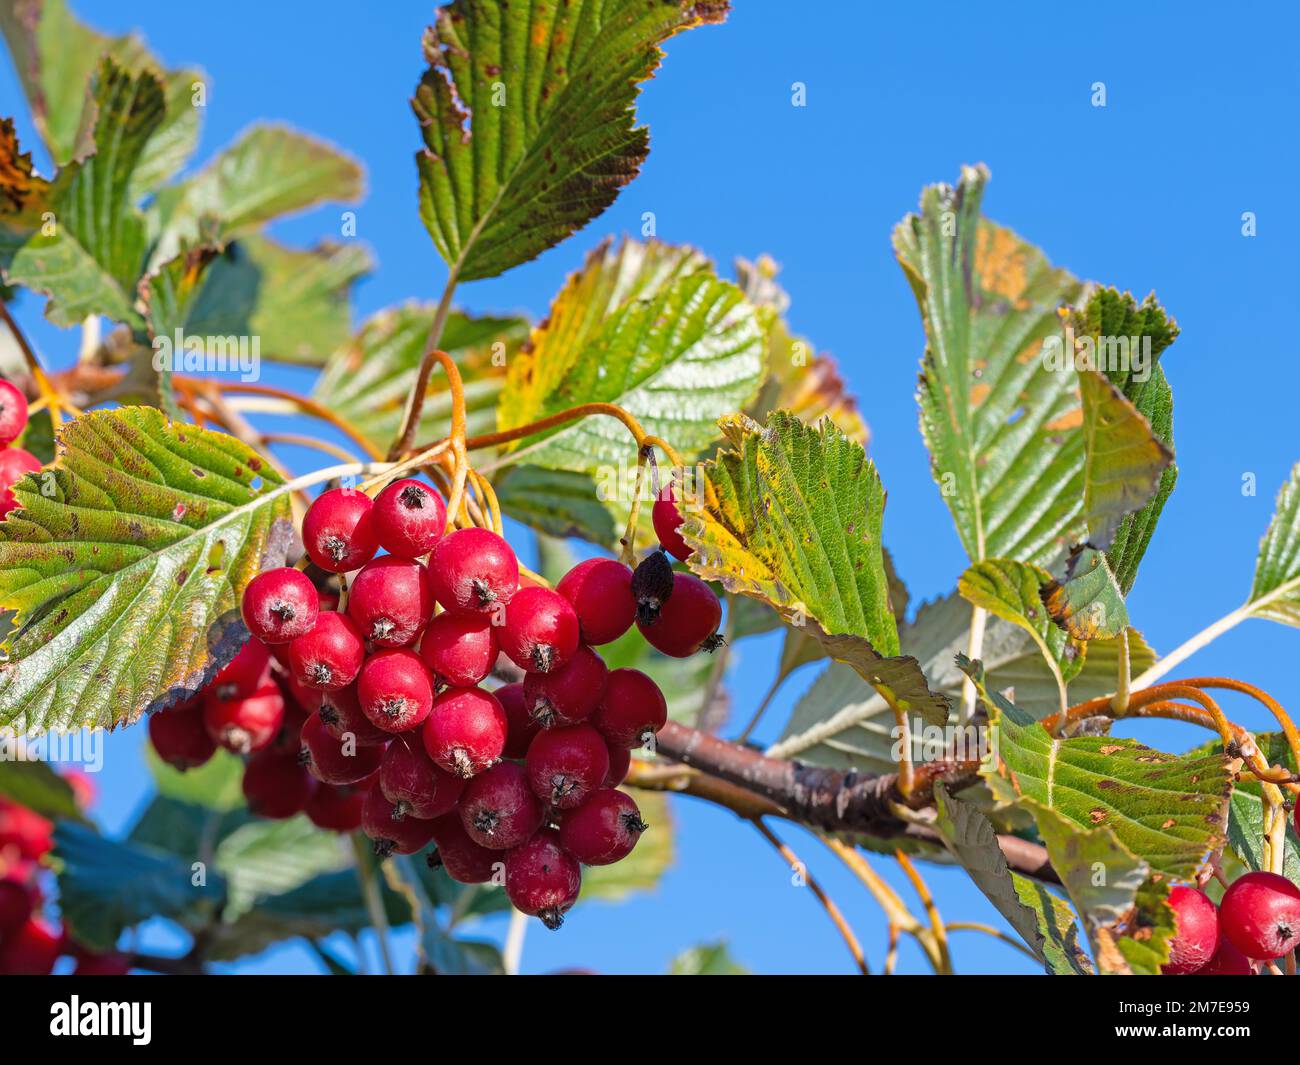 Fruits from the meal berry tree in a close-up Stock Photo